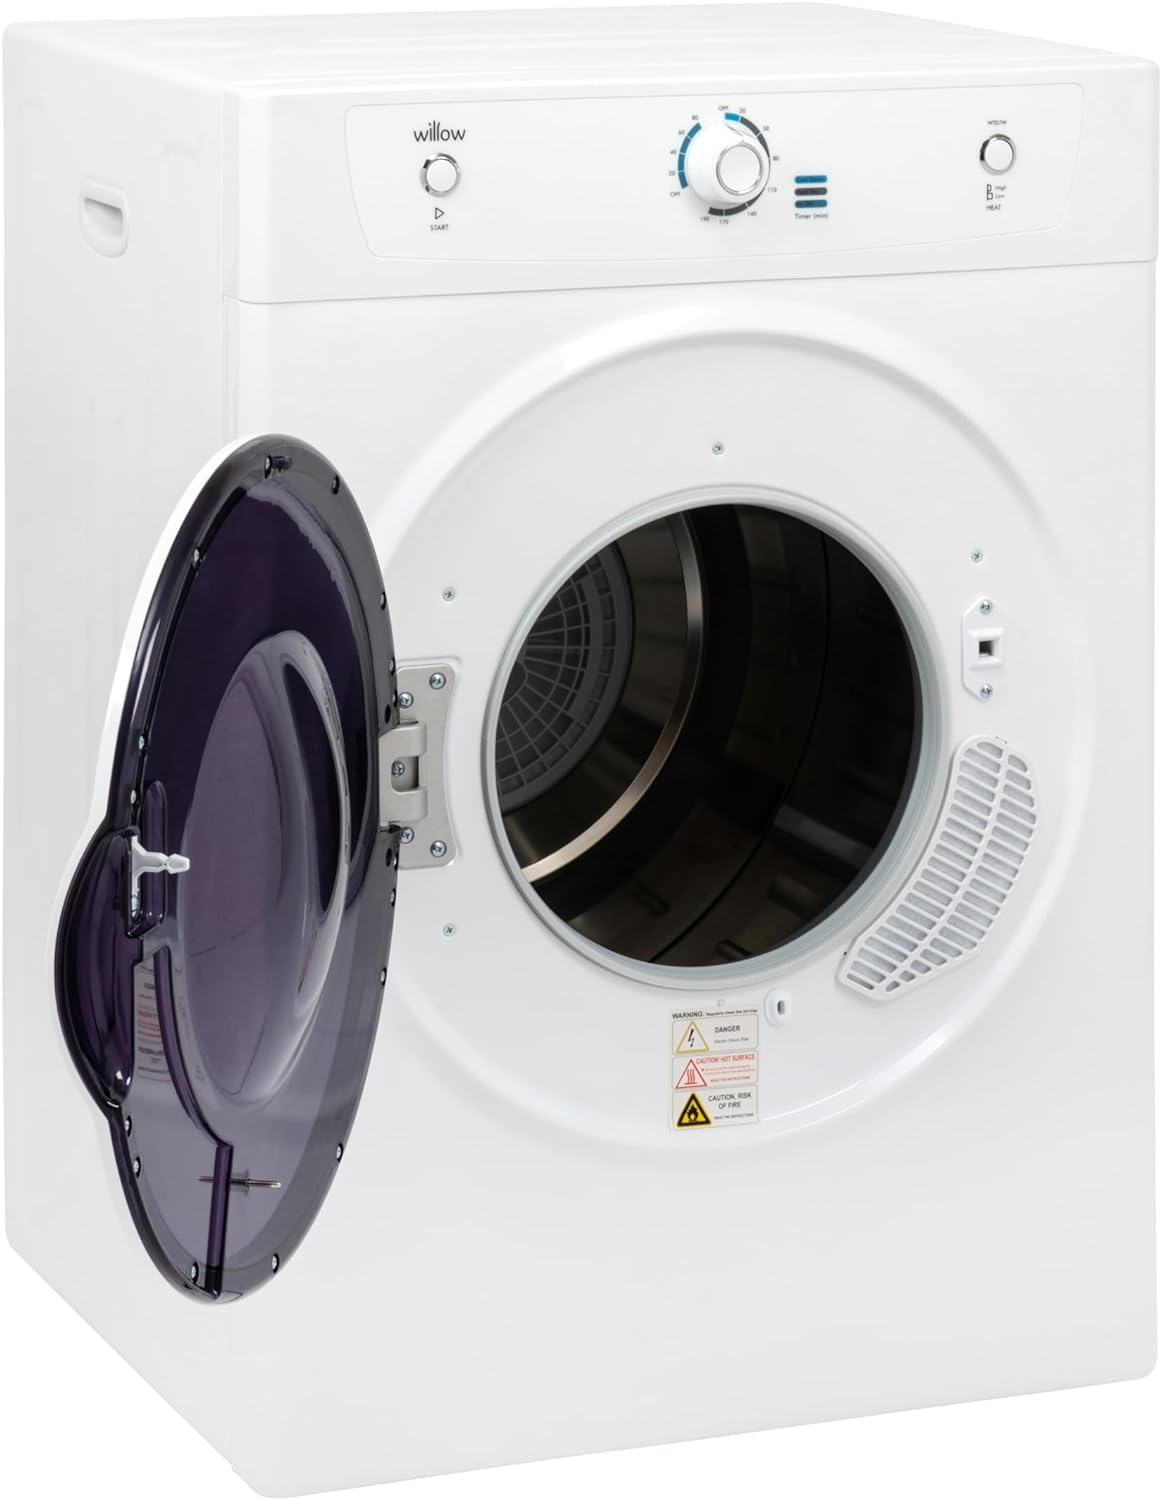 Willow WTD7W 7kg Vented Dryer, Front Loading with Child Lock, 3 Temperatures, Mehanical Controls, Crease Guard, 2 Year Warranty - White - Amazing Gadgets Outlet